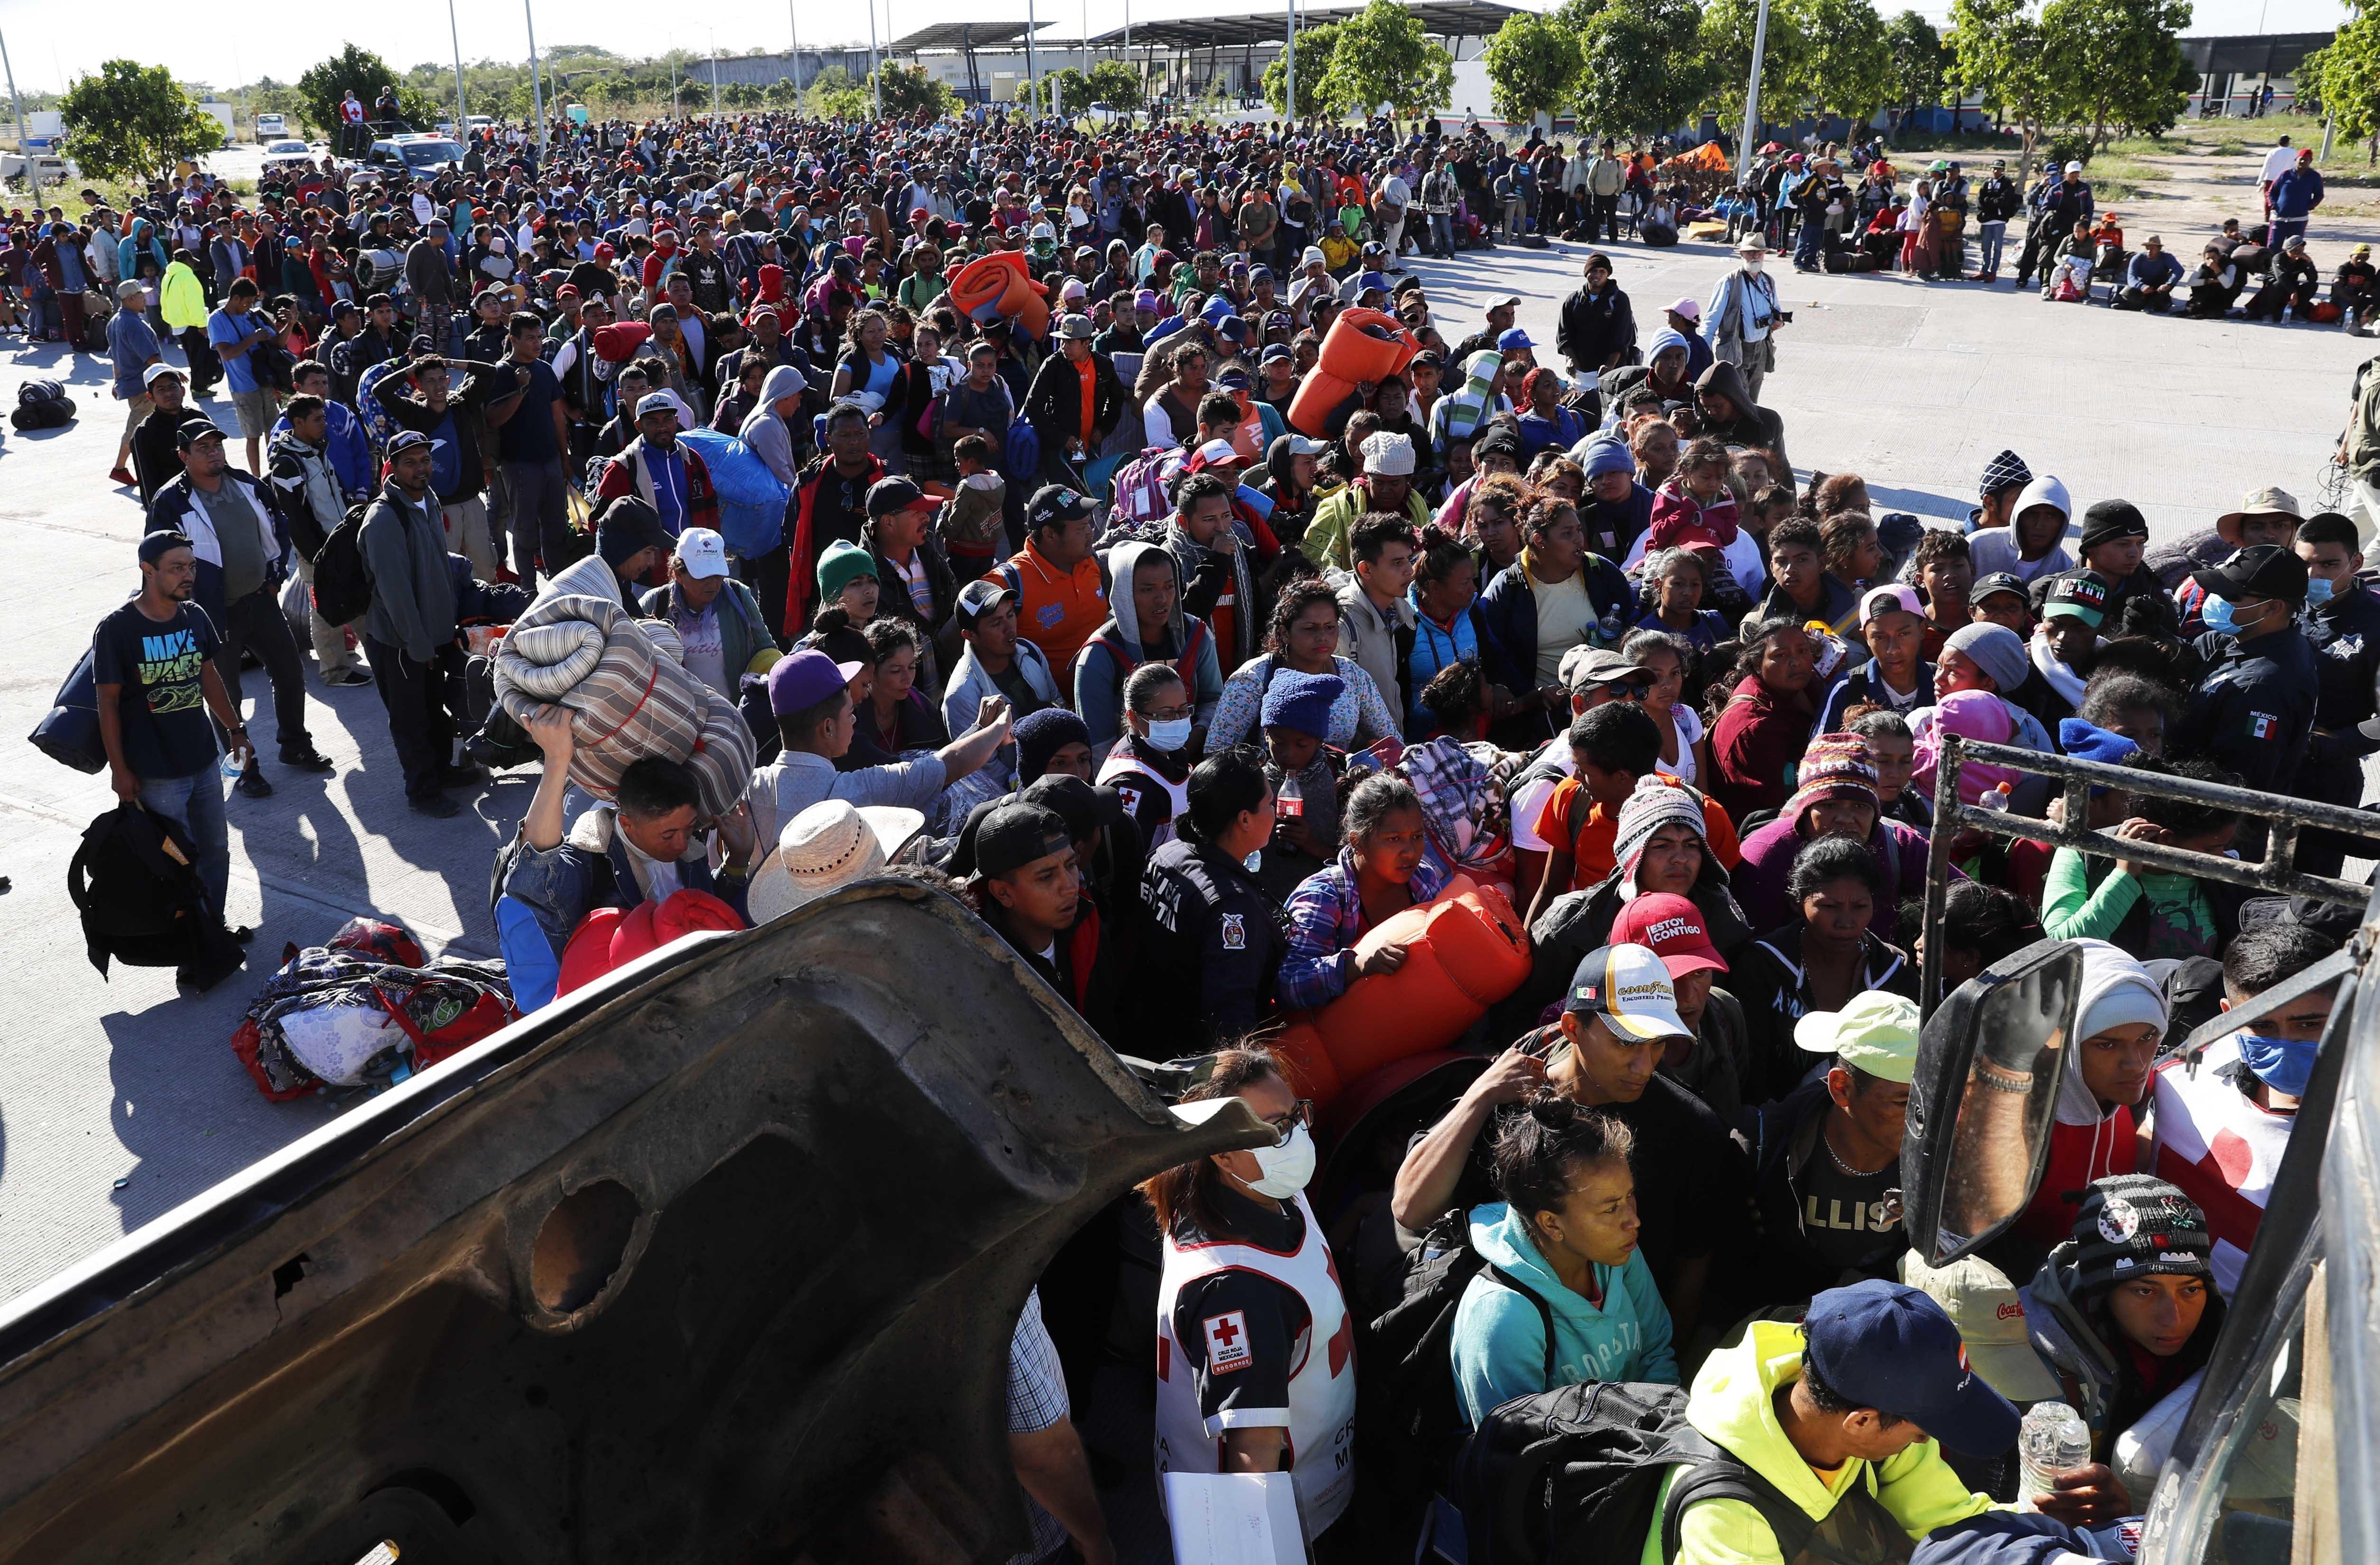 Migrant caravan groups arrive by hundreds at U.S. border The